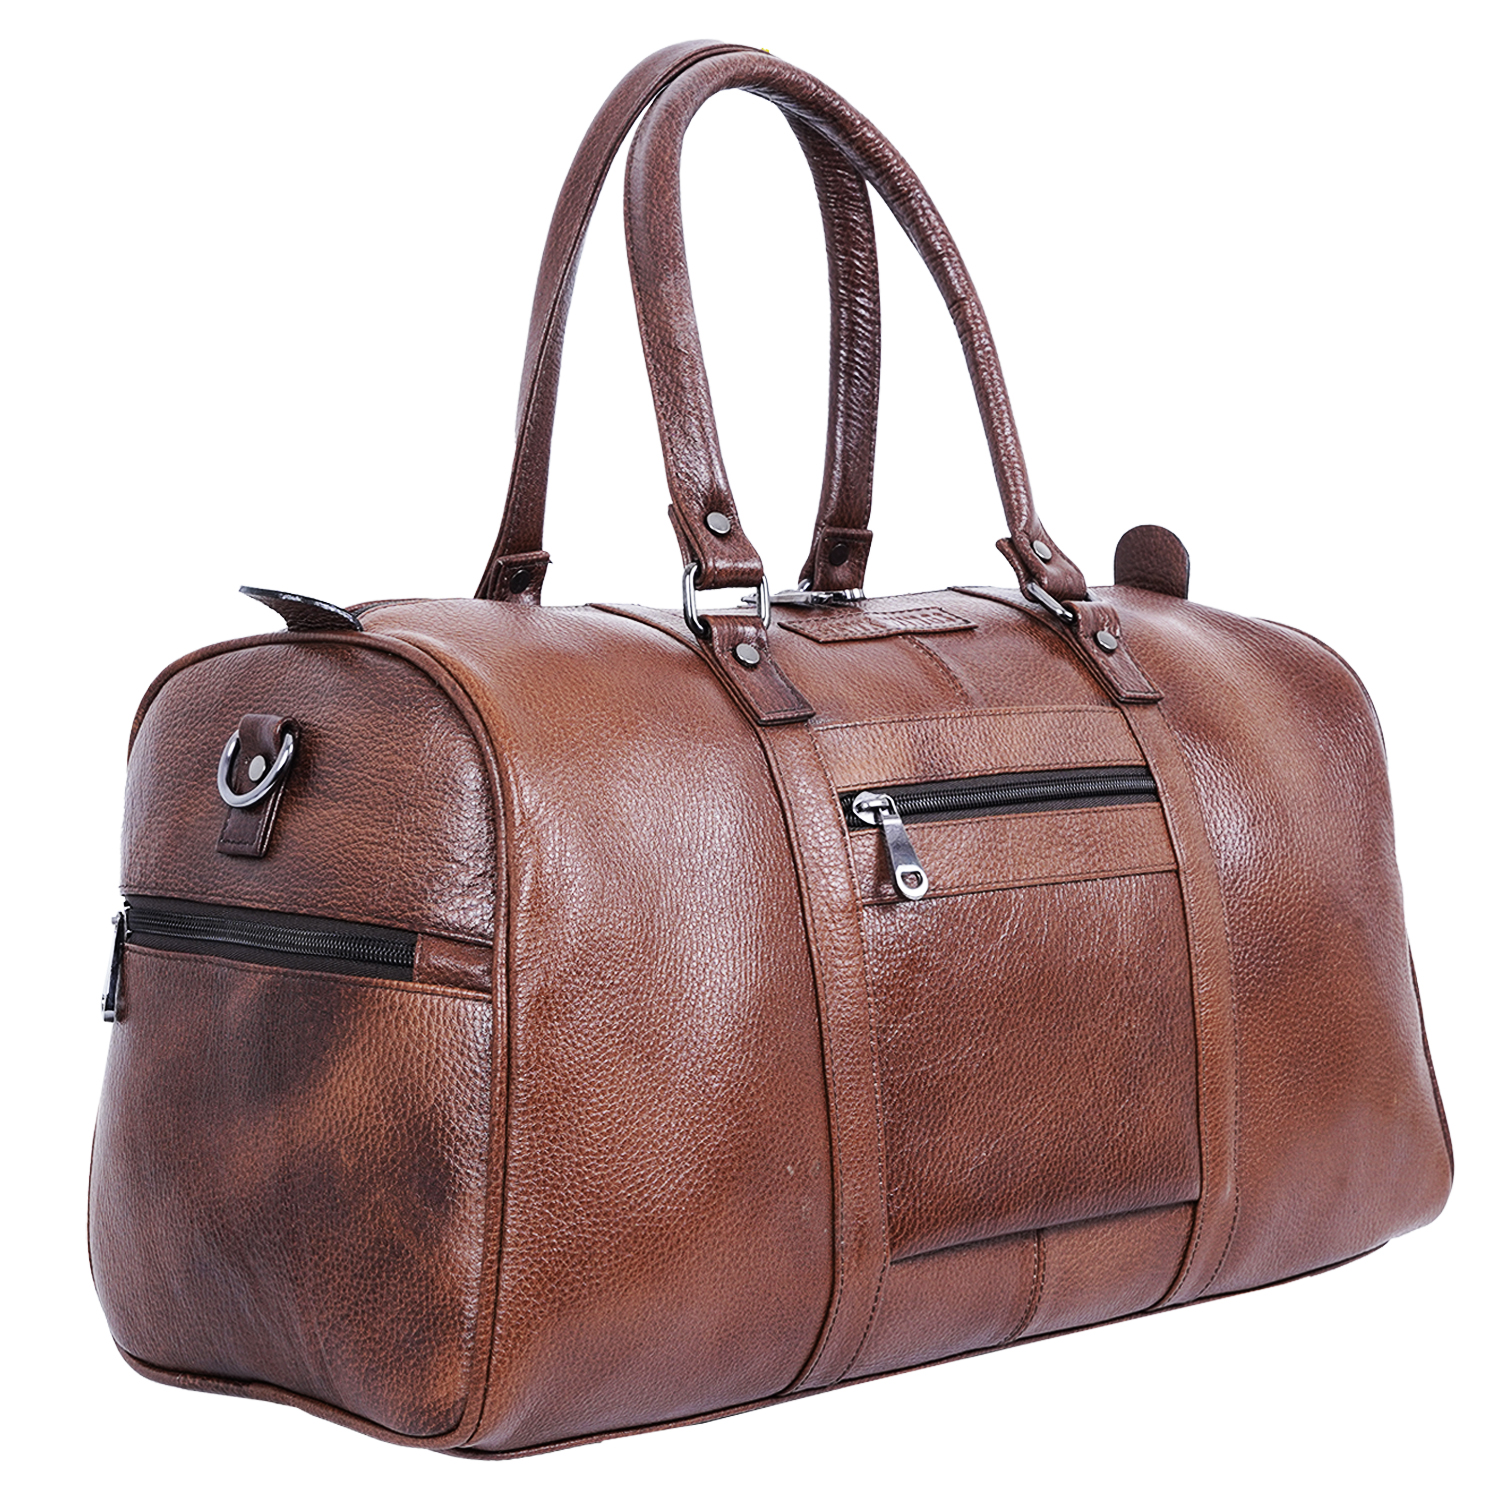 Leather Travel Duffle Bag for Men Women - Leather Duffel Carry on Overnight Weekender Bags Tan-asset-181